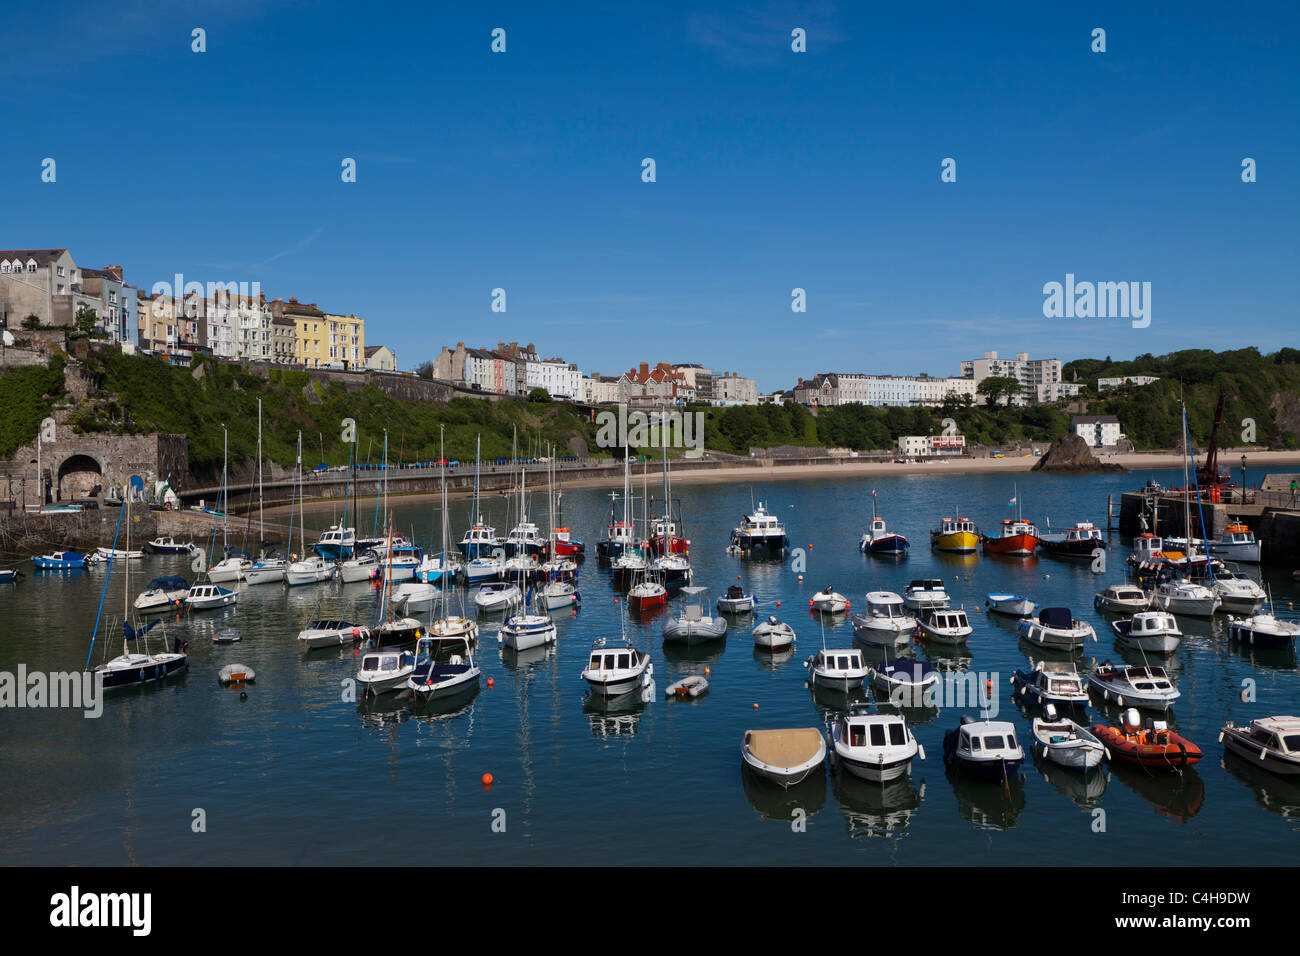 Tenby Harbour at hight tide with boats moored in rows Stock Photo